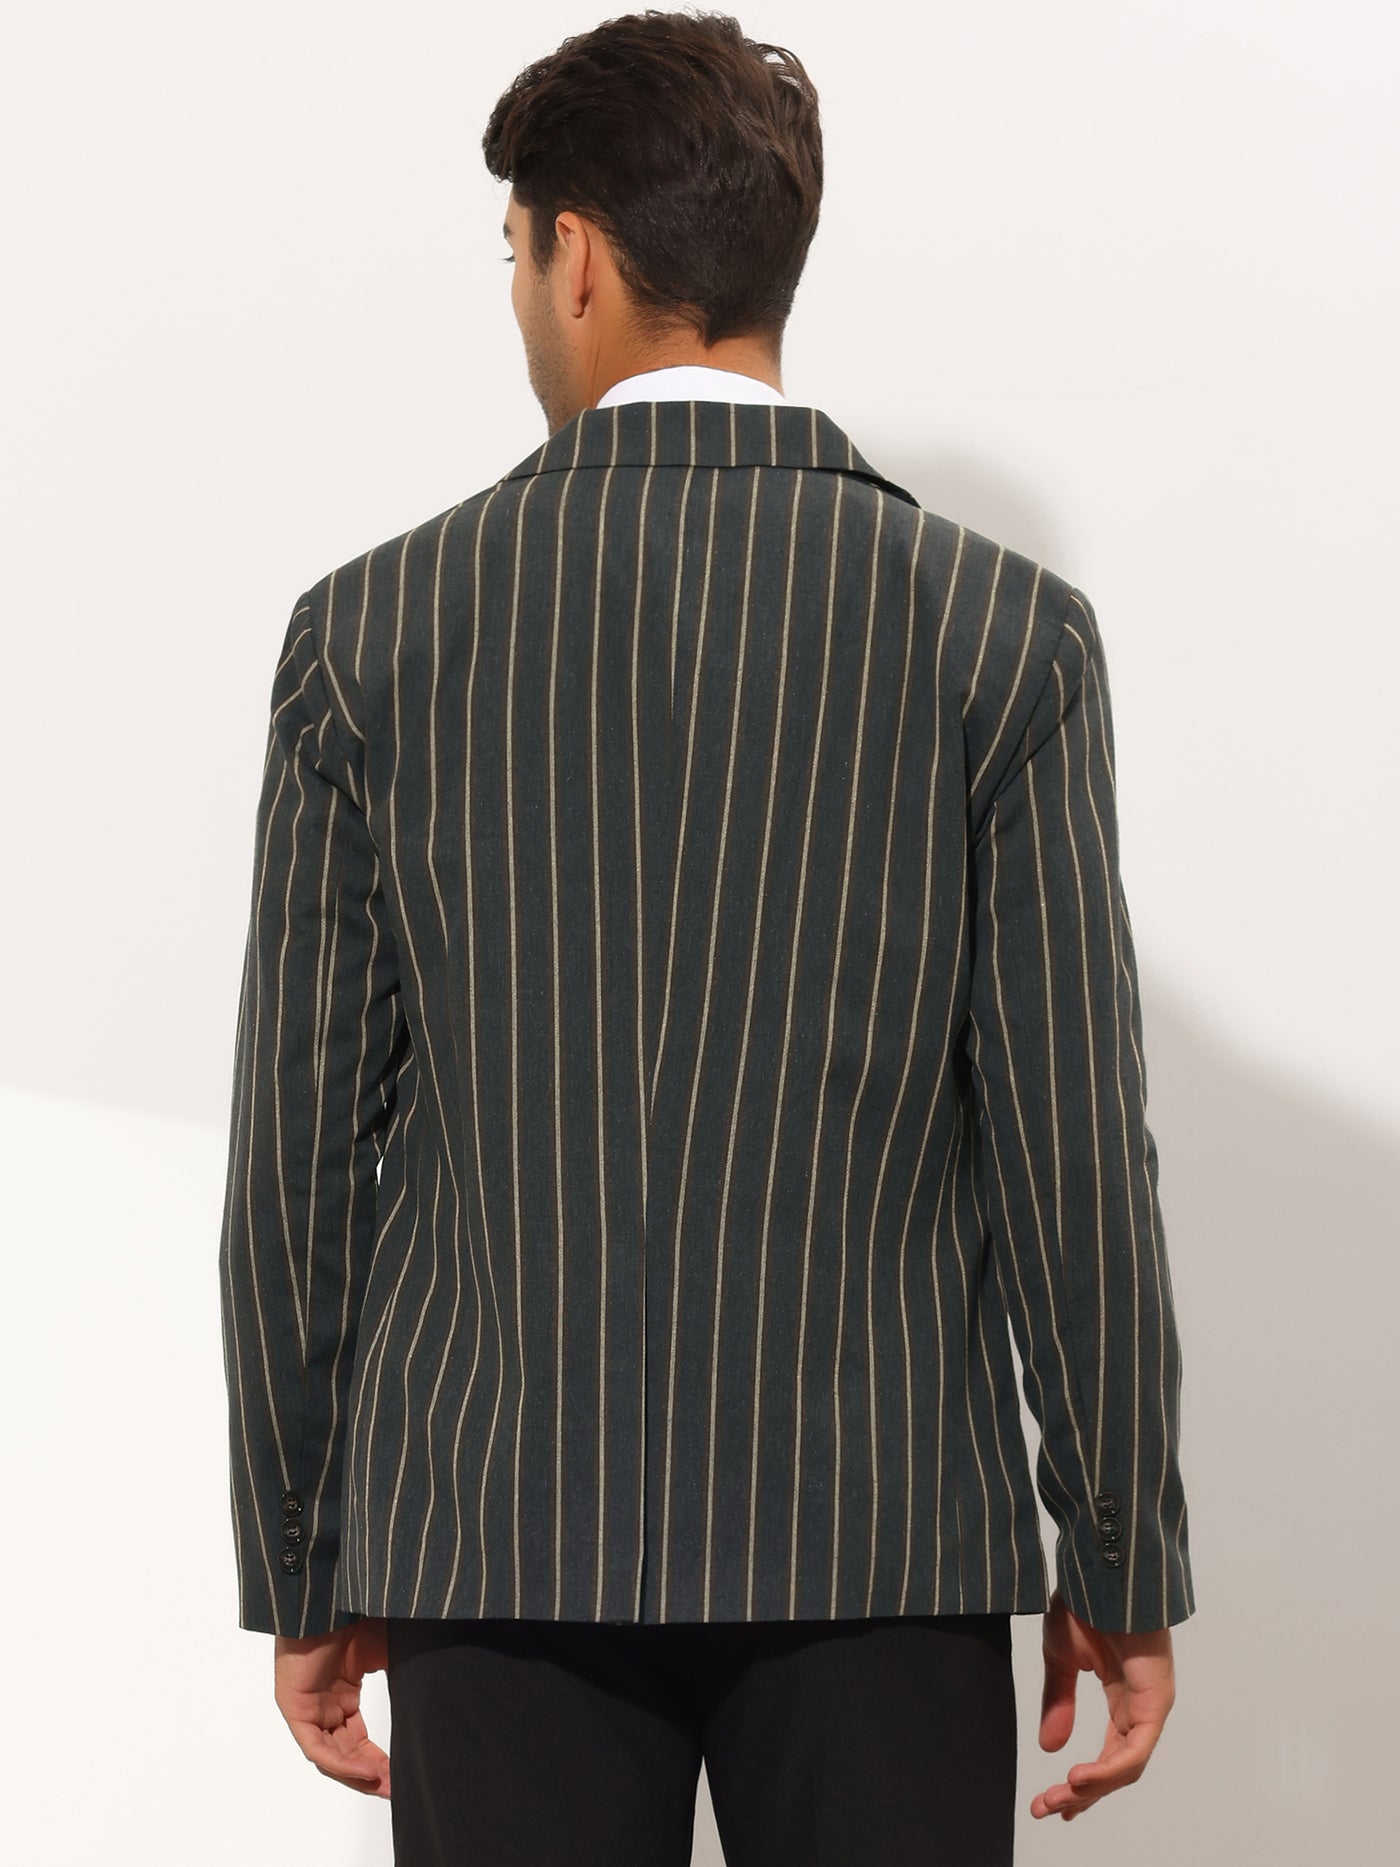 Bublédon Men's Contrasting Color Striped Notched Lapel Single Breasted Blazer